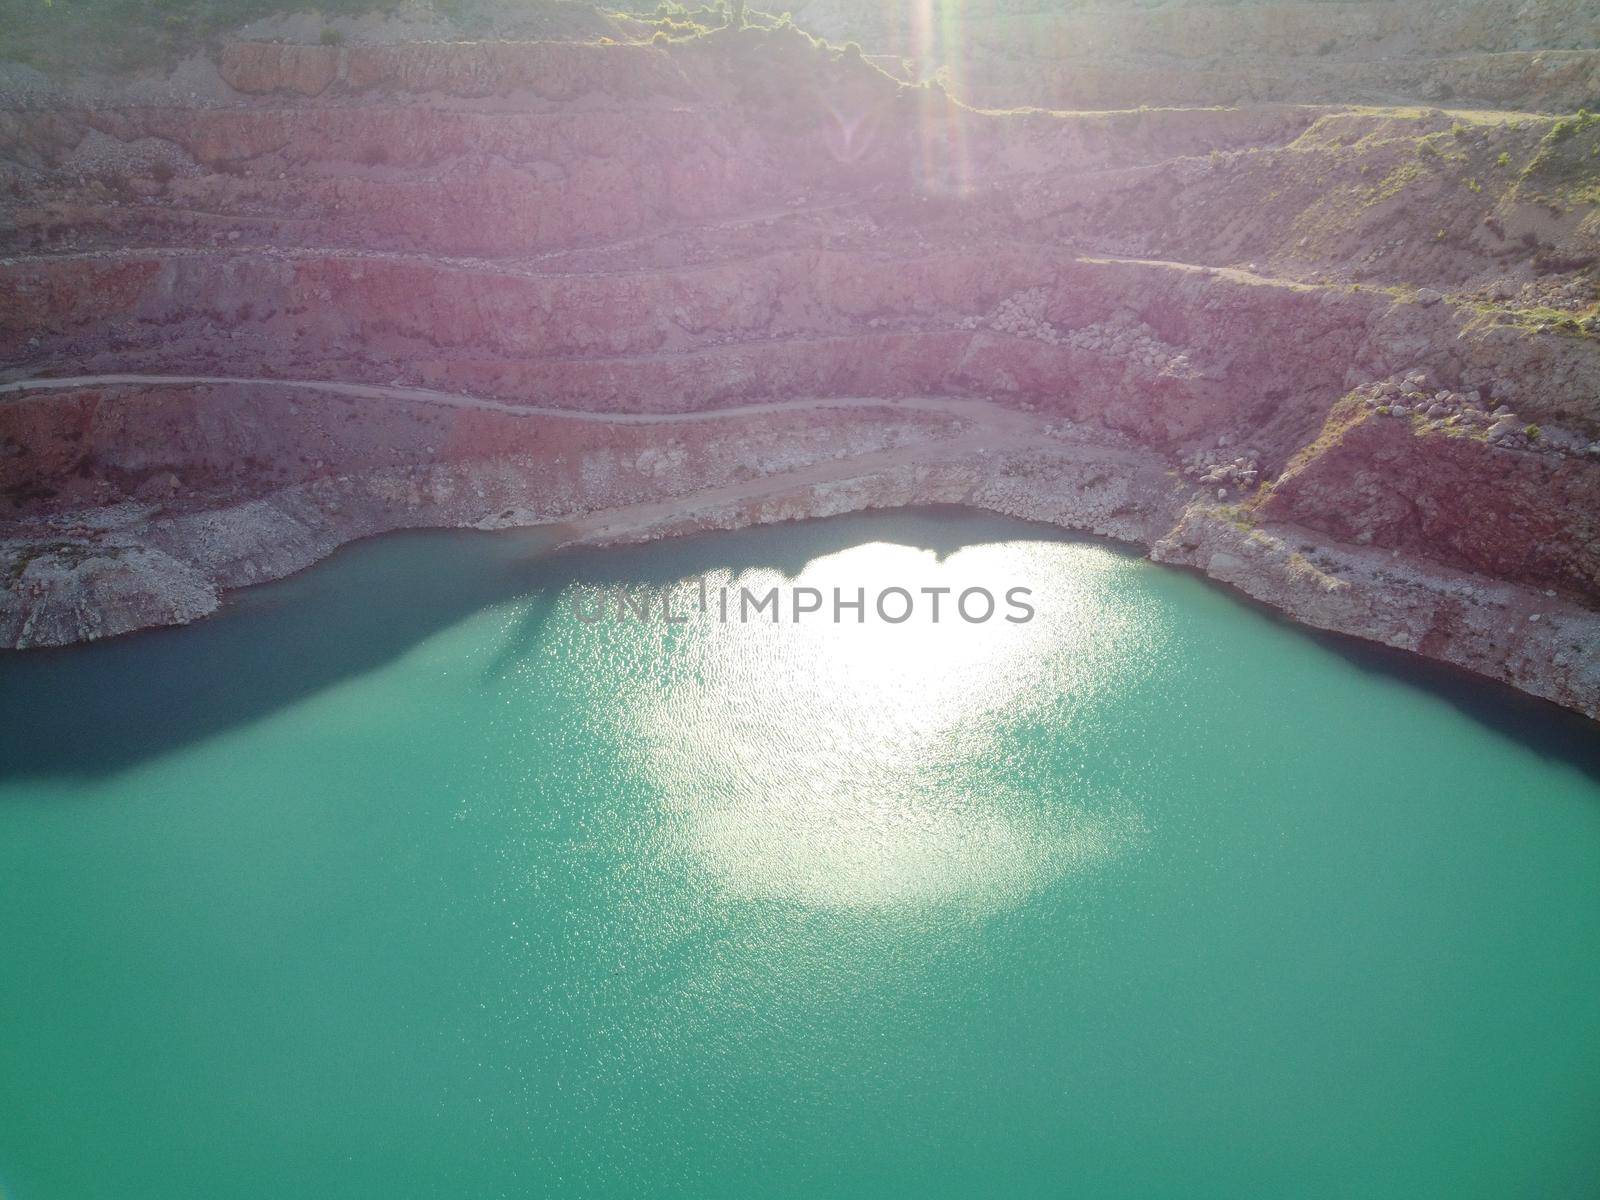 Flight over the turquoise surface of the lake in the center of the quarry. Industrial of opencast mining quarry with flooded bottom. Small lake in the shape of a heart